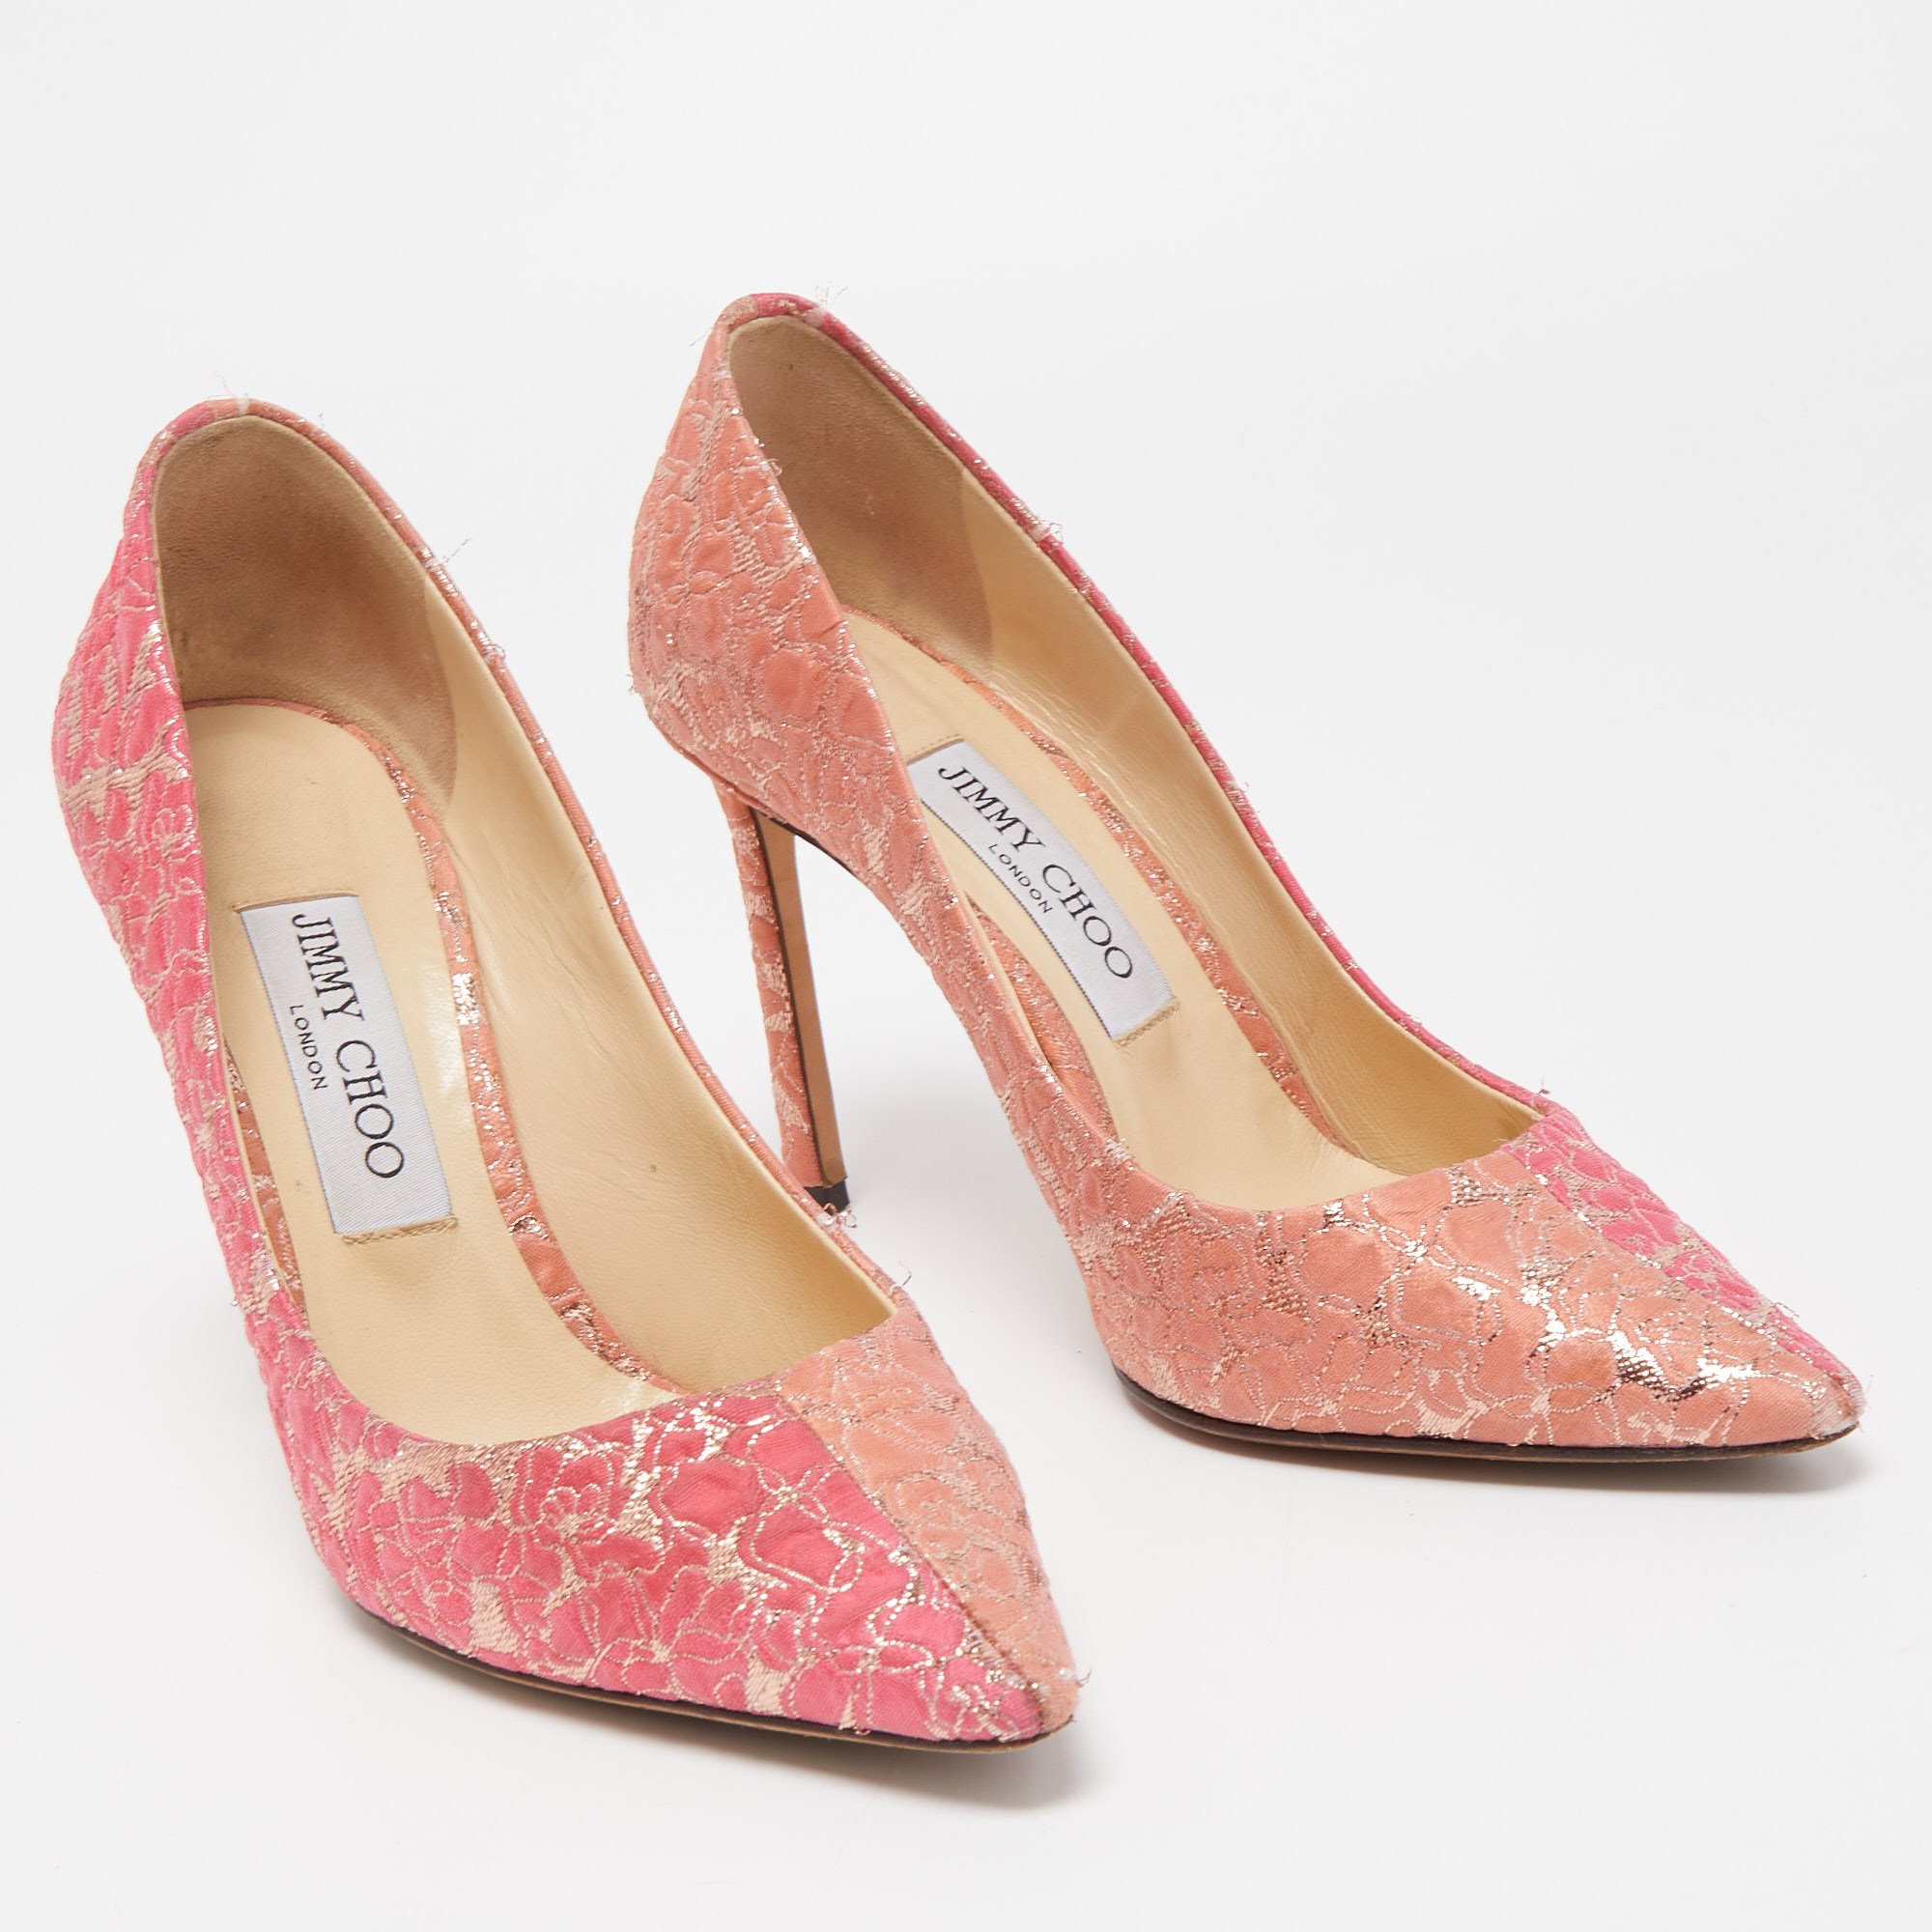 Jimmy Choo Pink Lurex Fabric Pointed Toe Pumps Size 37.5